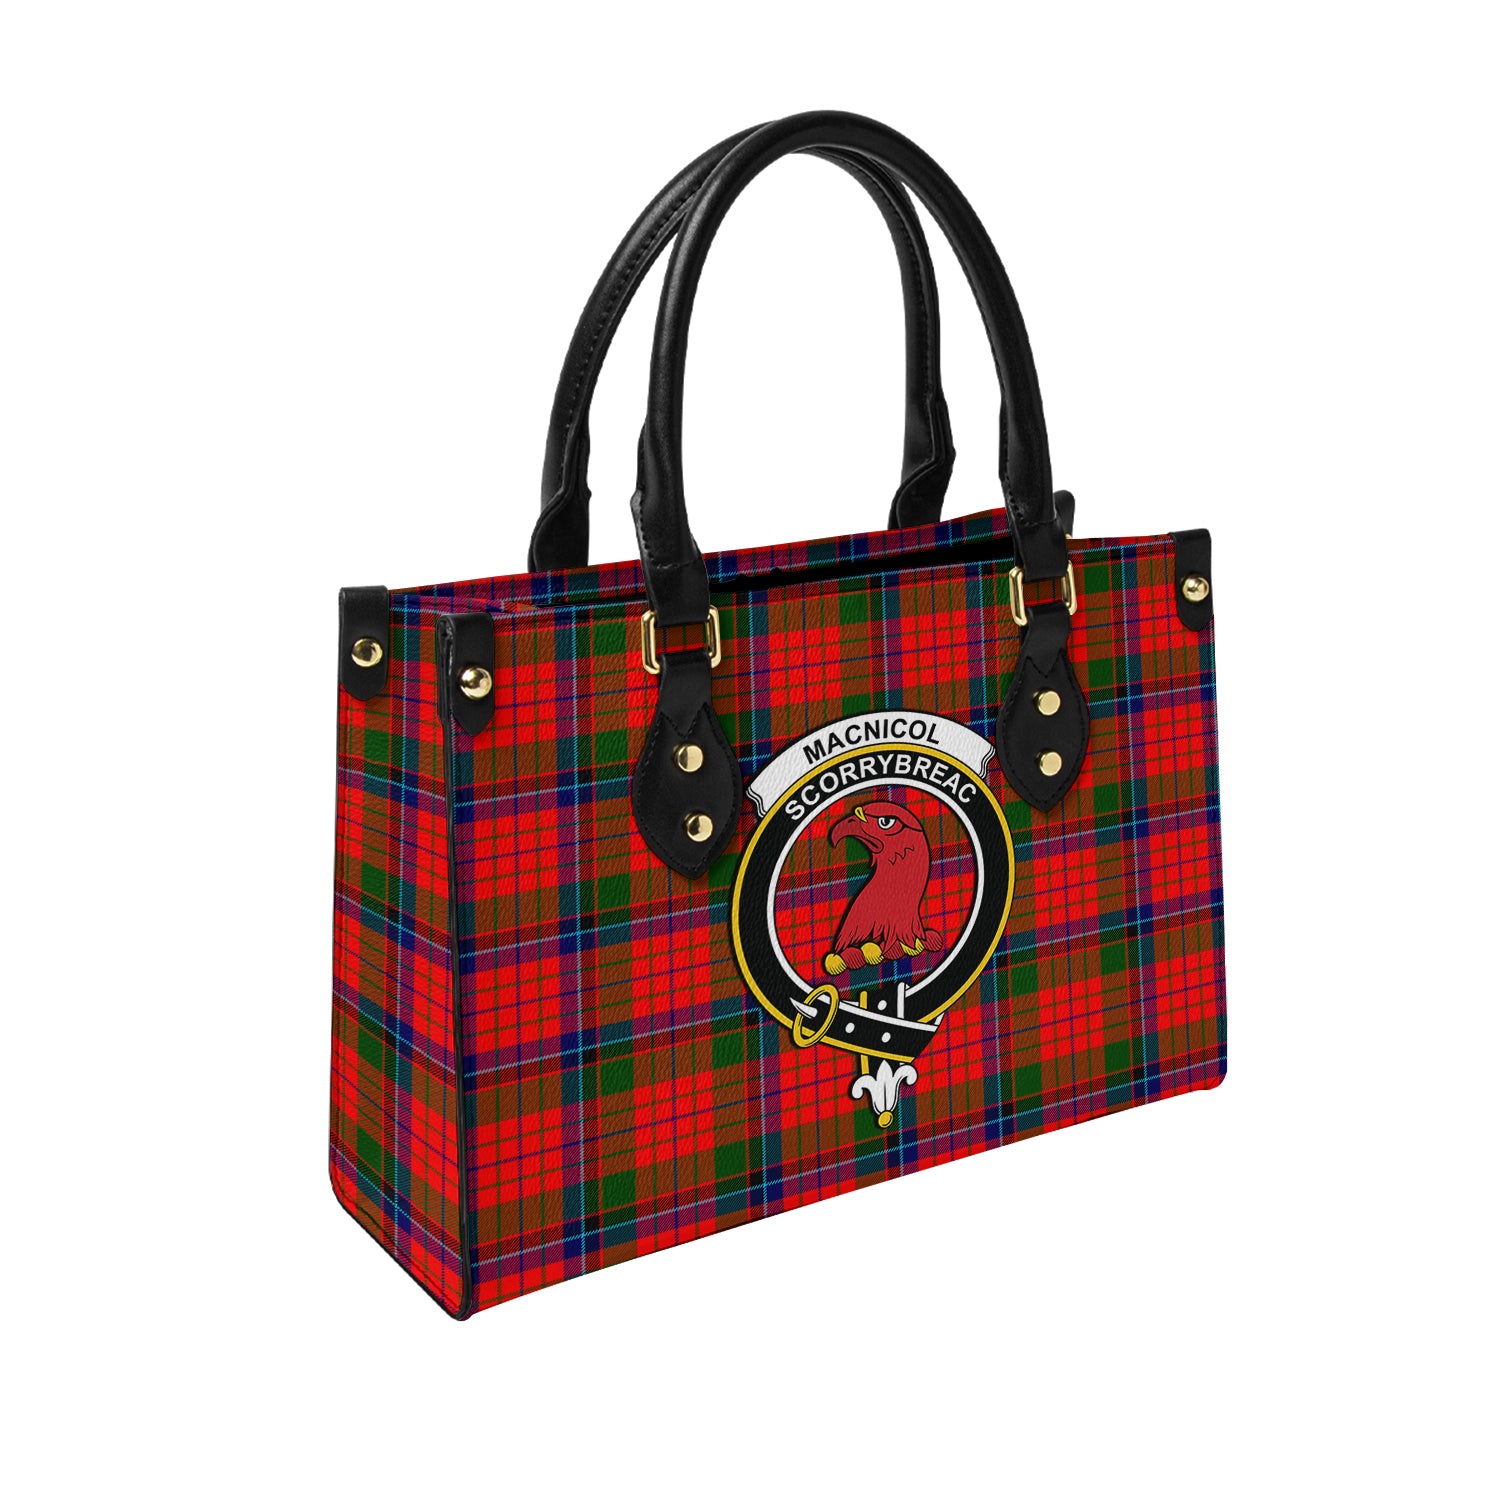 macnicol-of-scorrybreac-tartan-leather-bag-with-family-crest